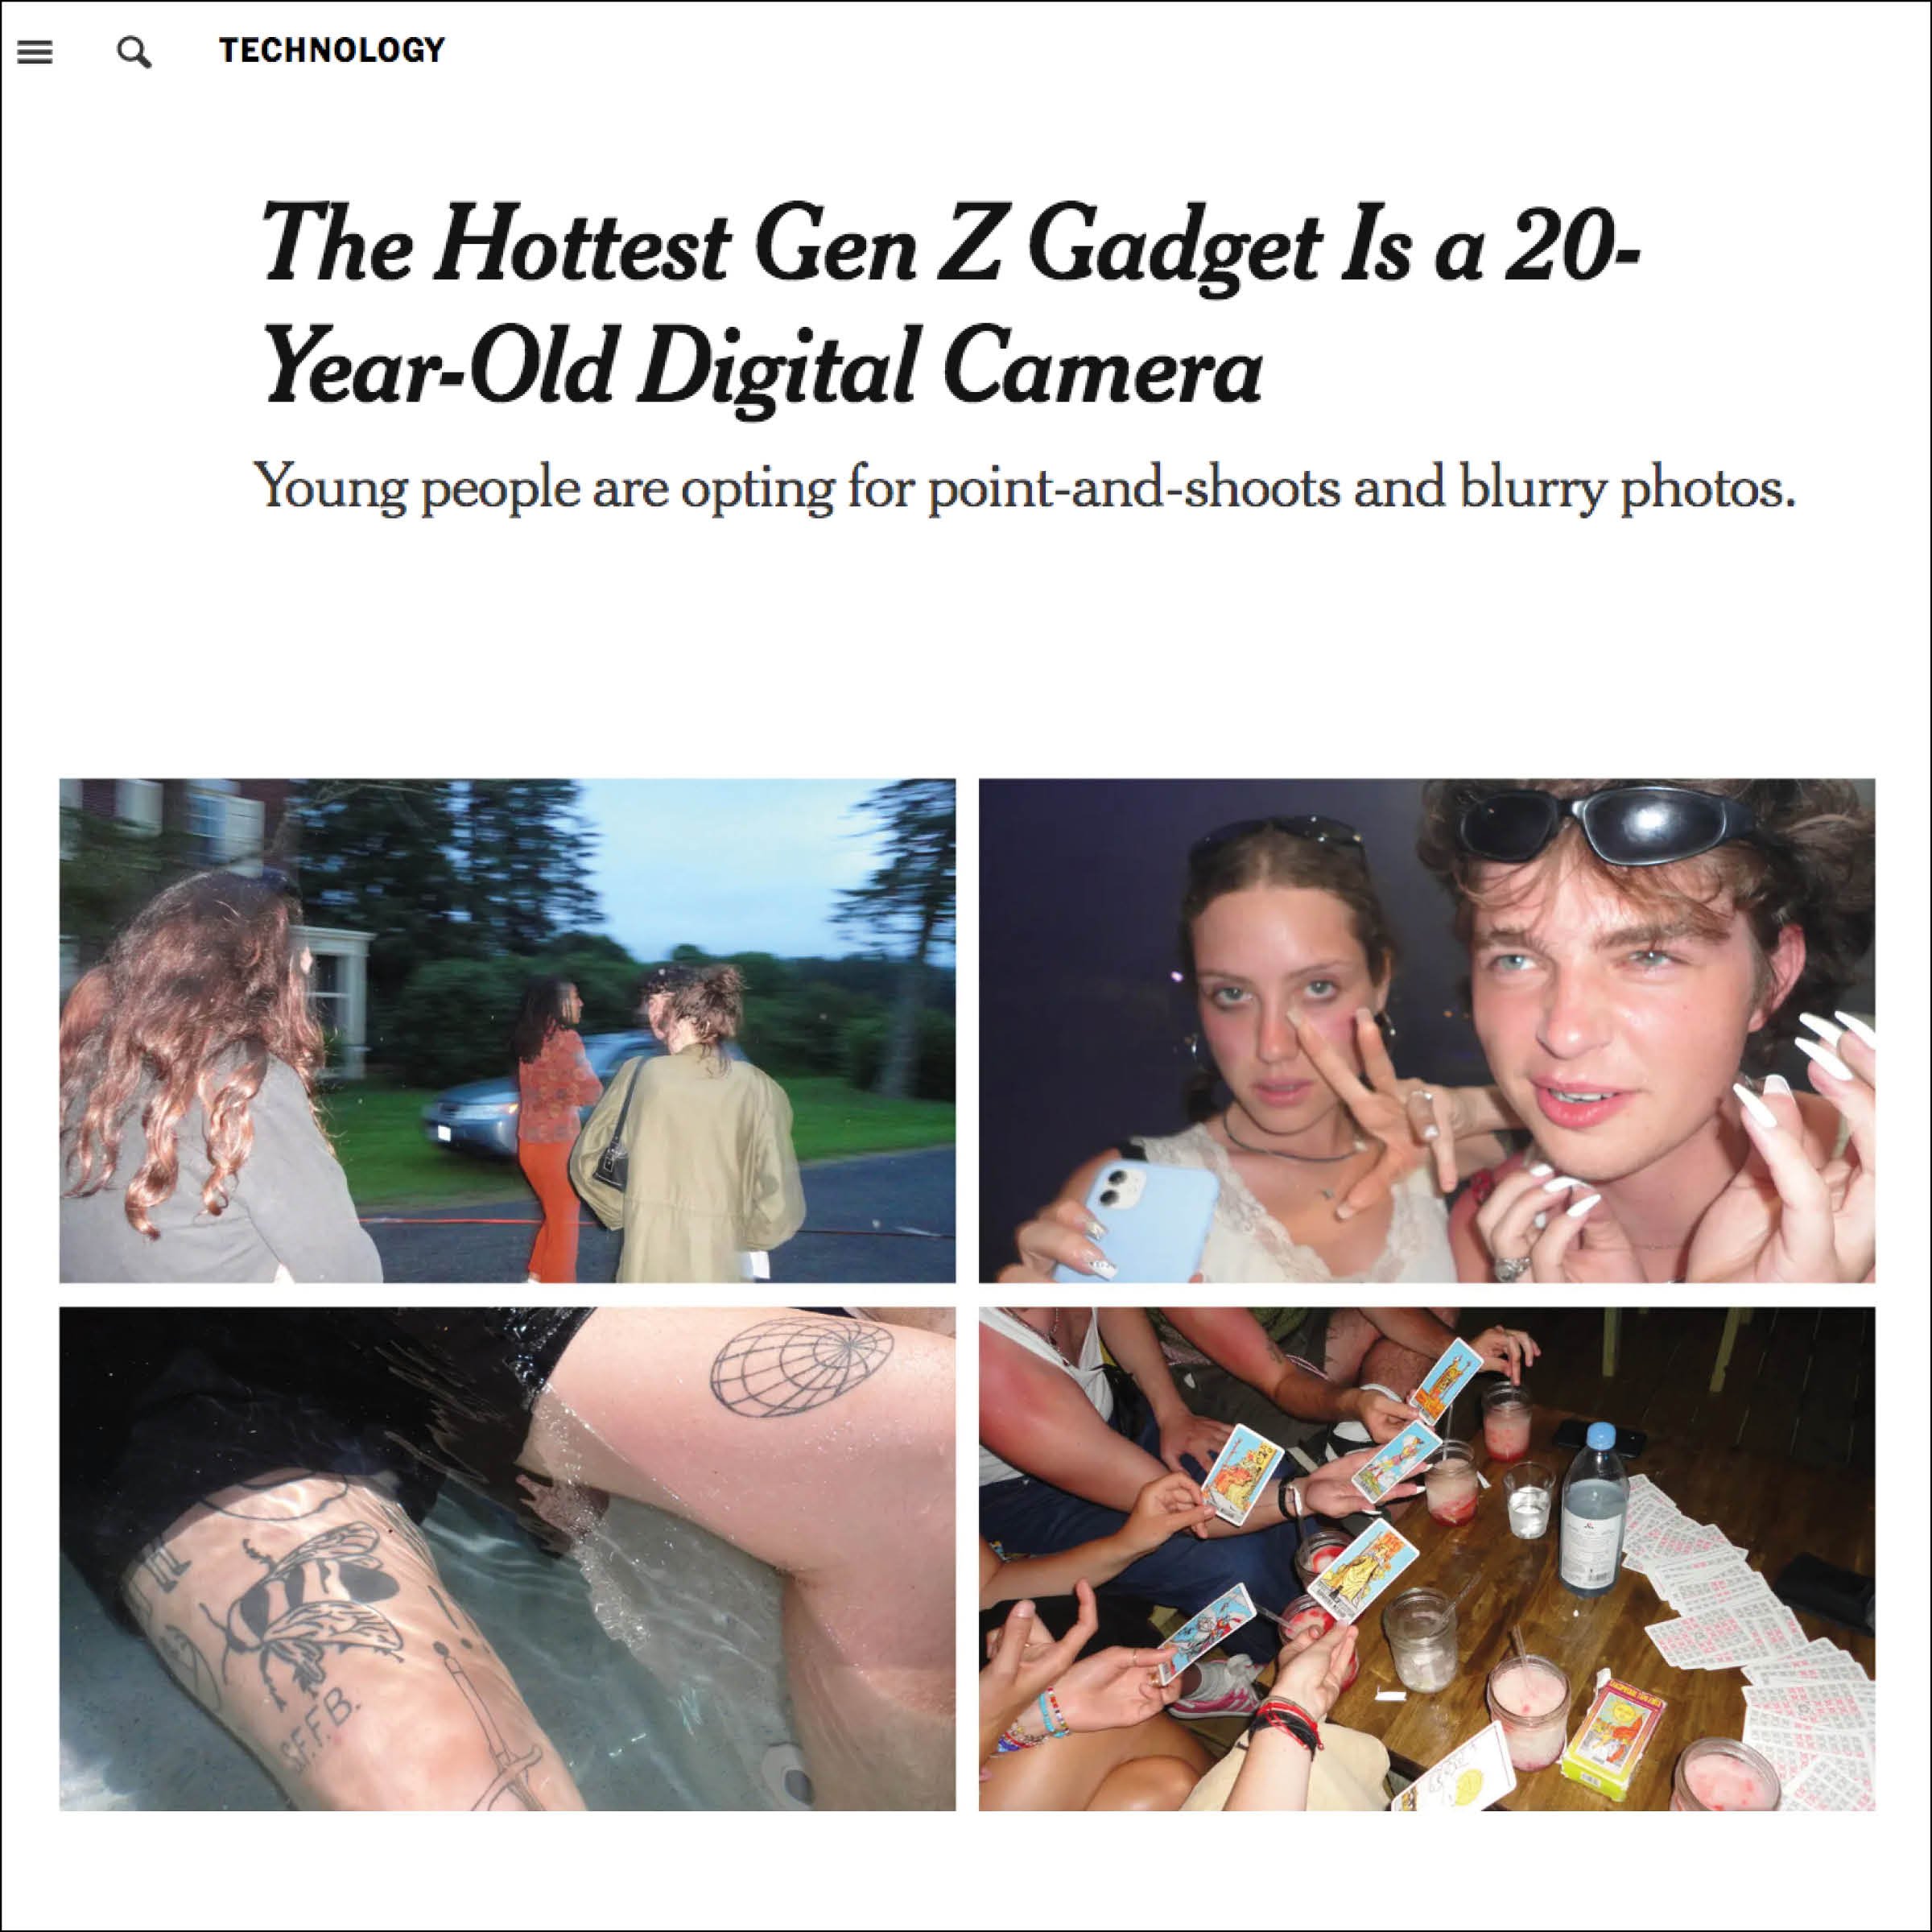 The hottest Gen Z gadget is a 20-year-old digital camera